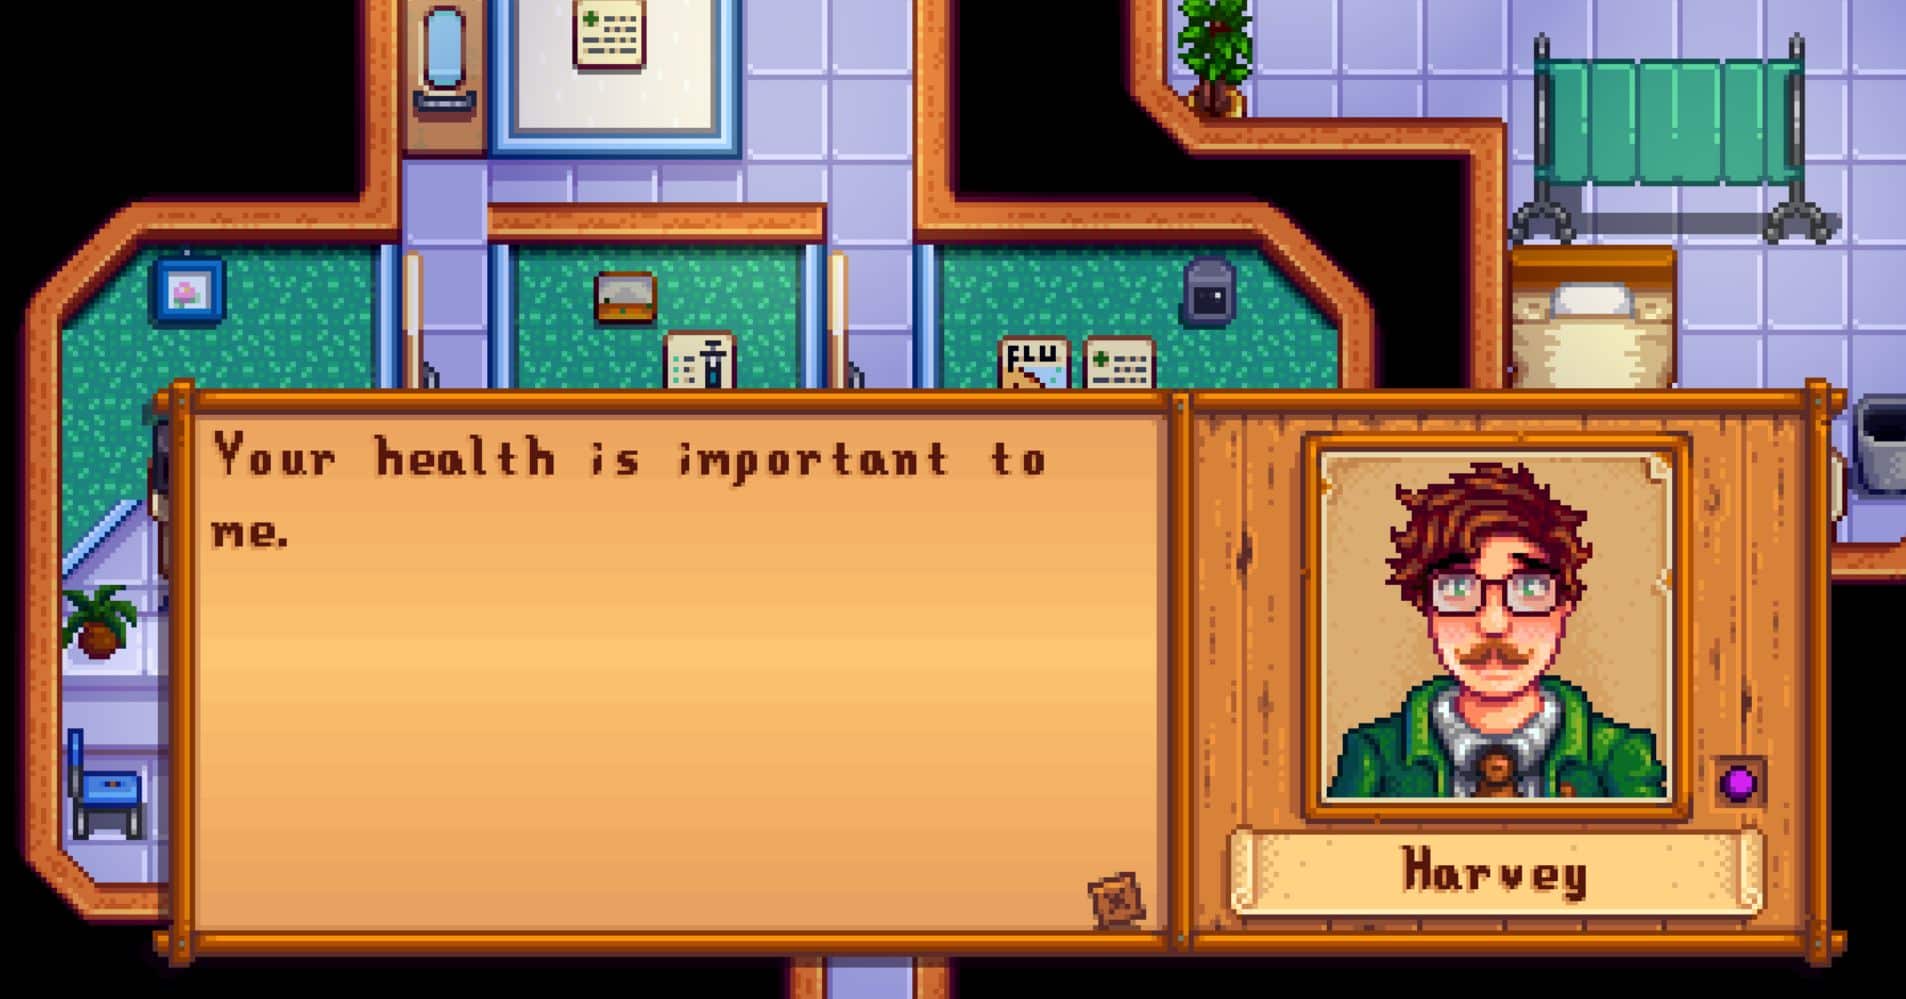 Harvey says he cares about your health